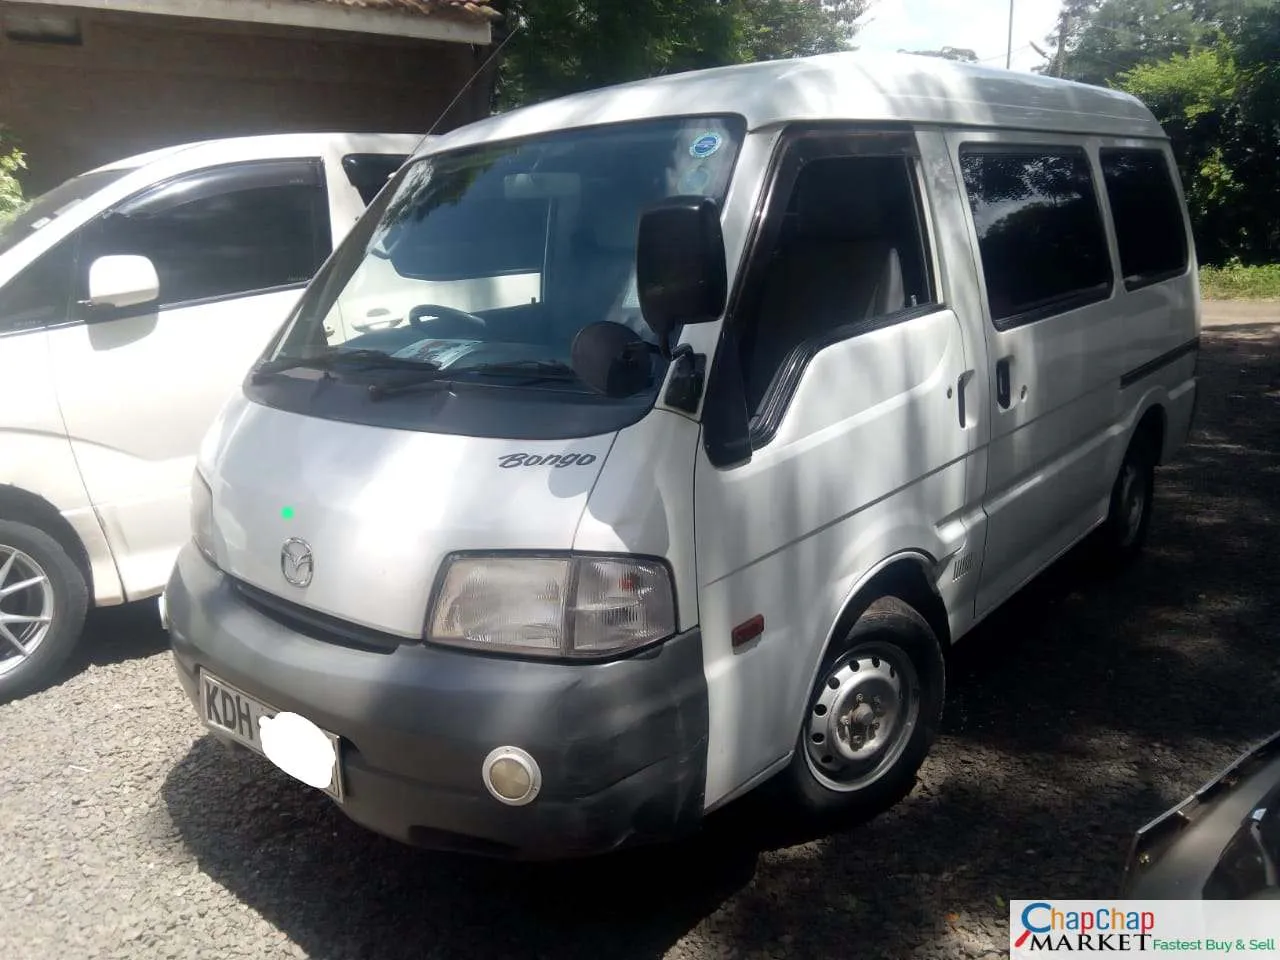 Mazda Bongo Van QUICKEST SALE You Pay 40% DEPOSIT hire purchase installments EXCLUSIVE TRADE IN OK HIRE PURCHASE INSTALLMENTS Kenya